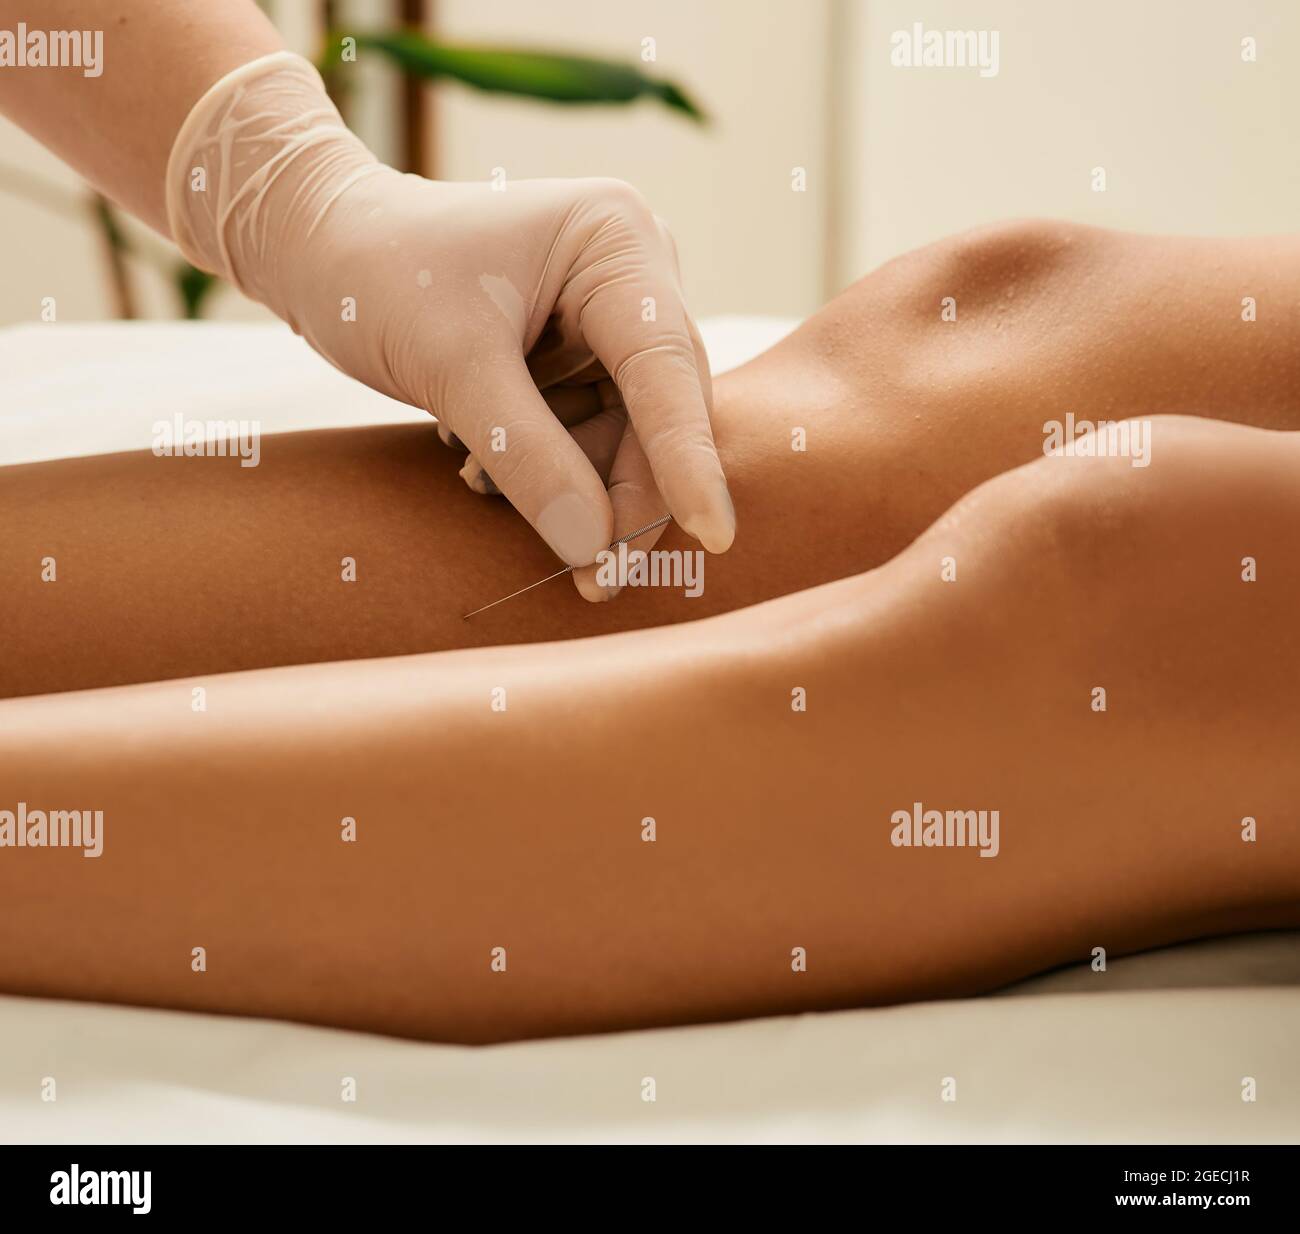 Acupuncture treatment for chronic leg pain. Chiropractor doing acupuncture therapy for female shin with needles Stock Photo